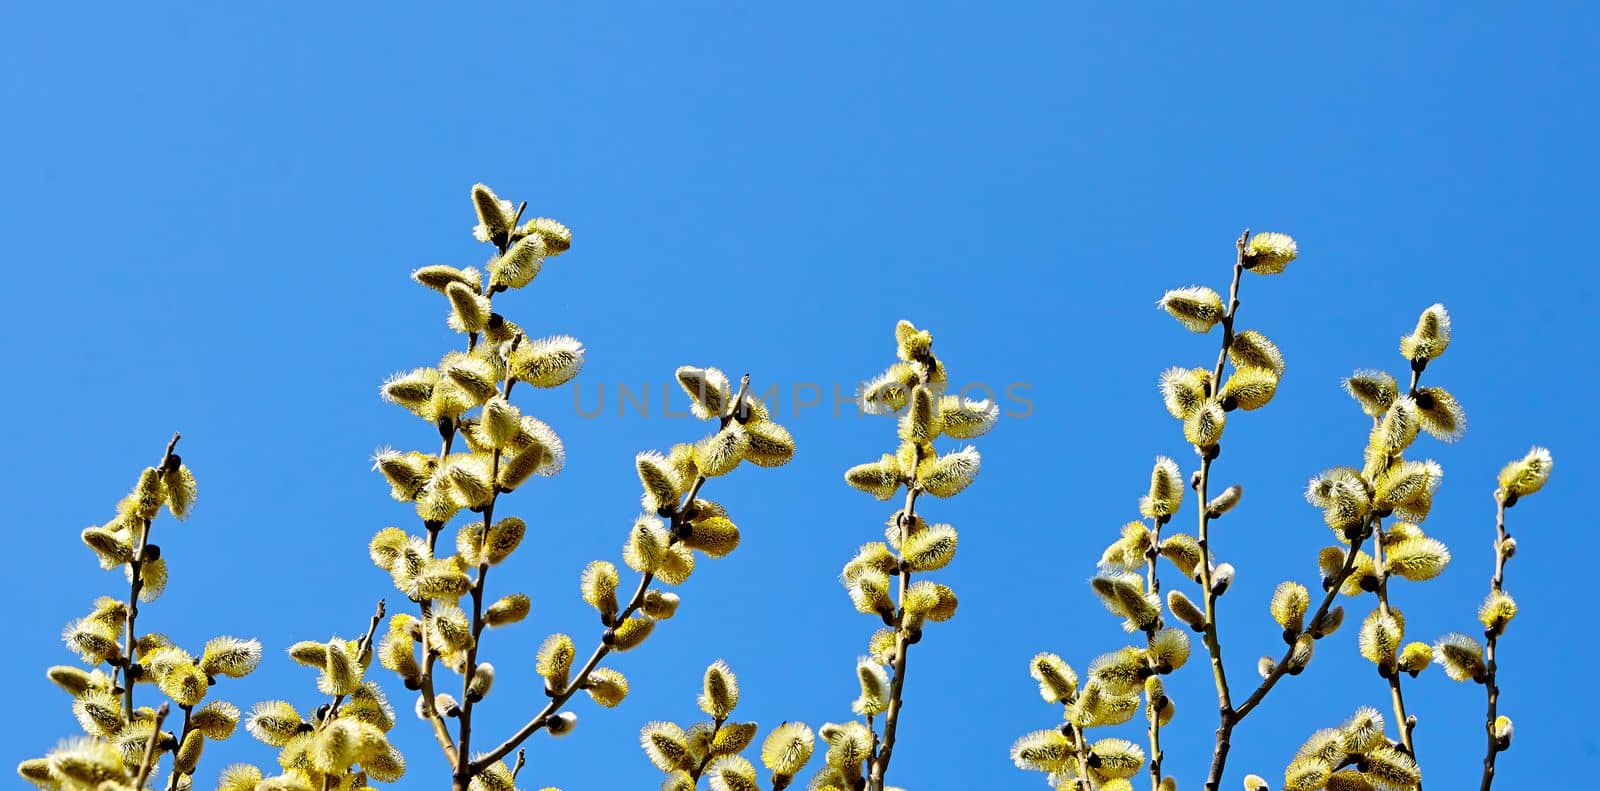 Goat willow, willow, blooms in spring on a clear day by Hil